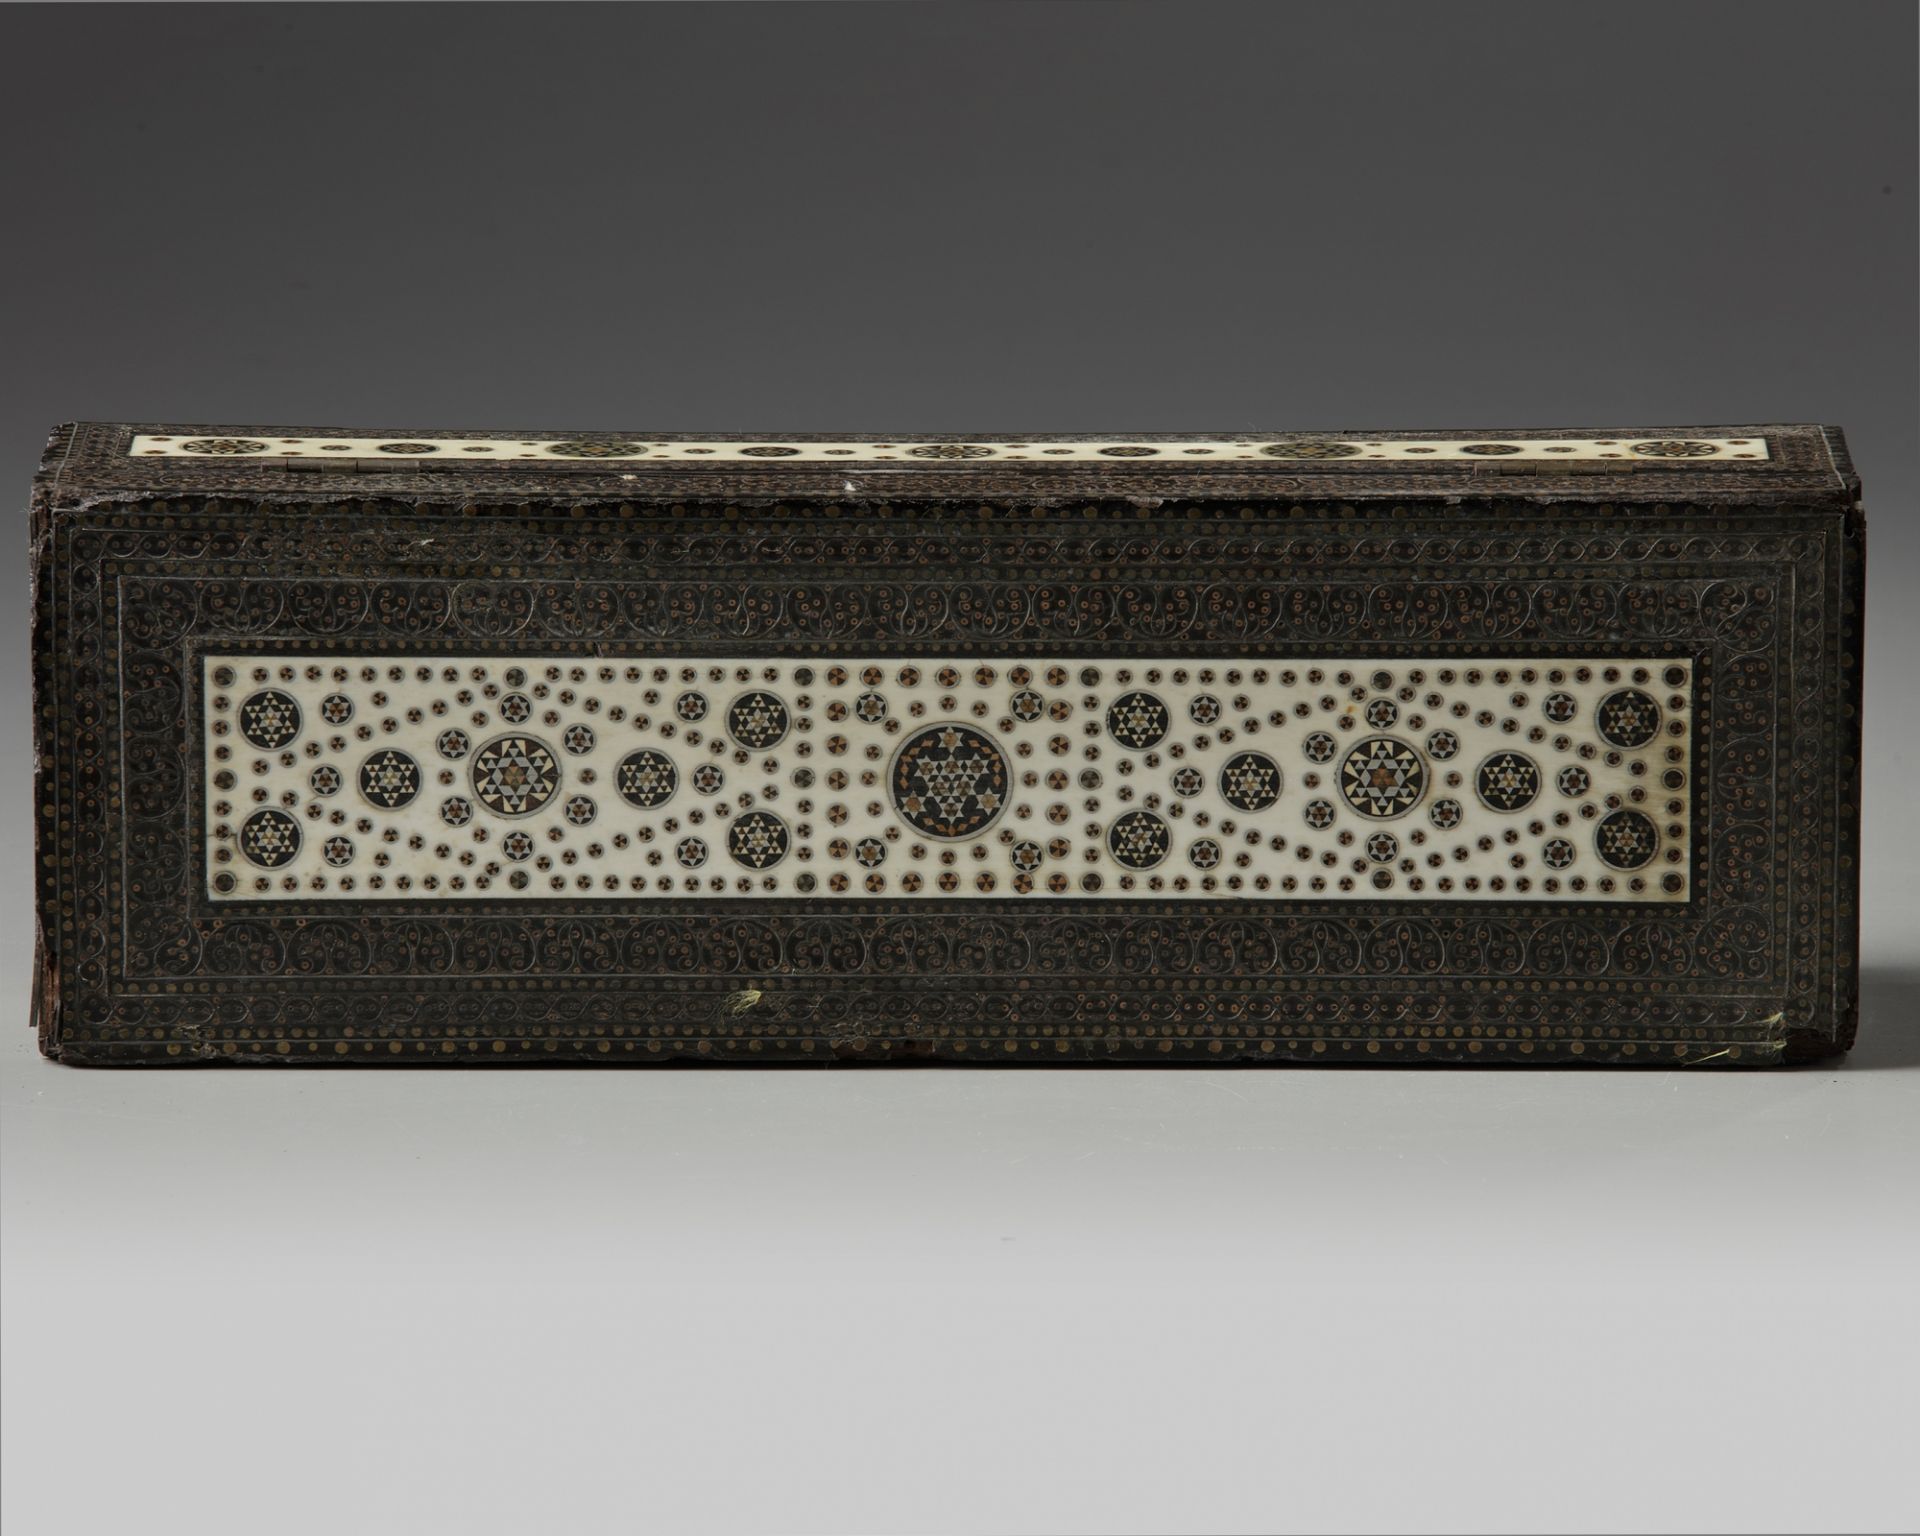 A silver and ivory inlaid wooden box - Image 4 of 4